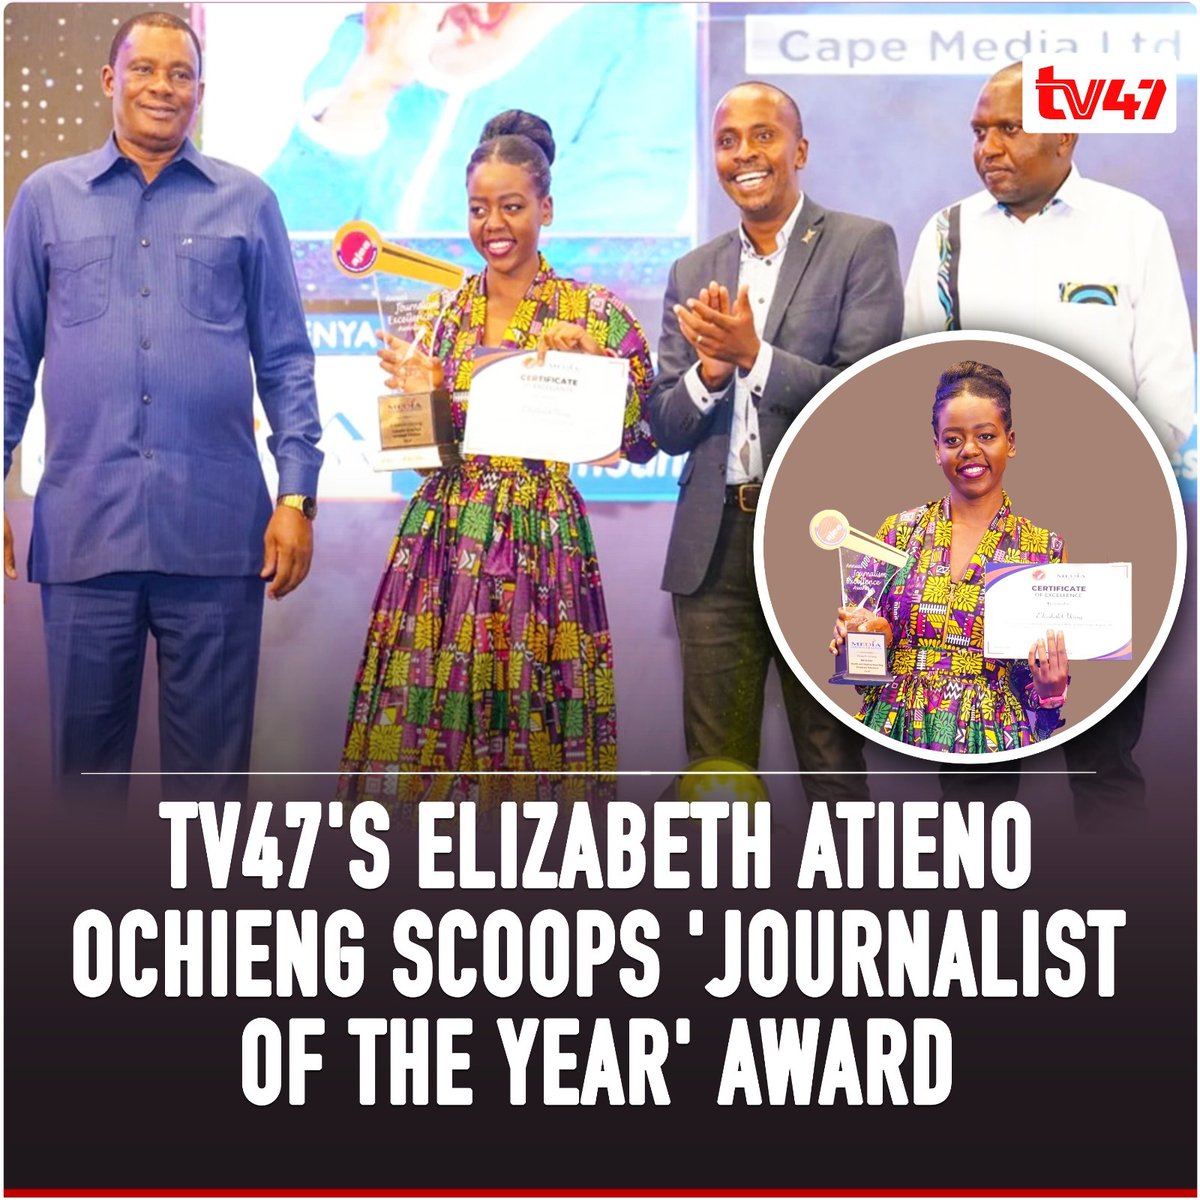 I'm so Grateful, Humbled and Honored to Have clinched this award as Journalist of the Year . Thank you @mediaCouncilK for bestowing this prestigious award upon me. I dedicate this award to members of the Ilimanyang' community, Turkana who agreed to share their story with TV47